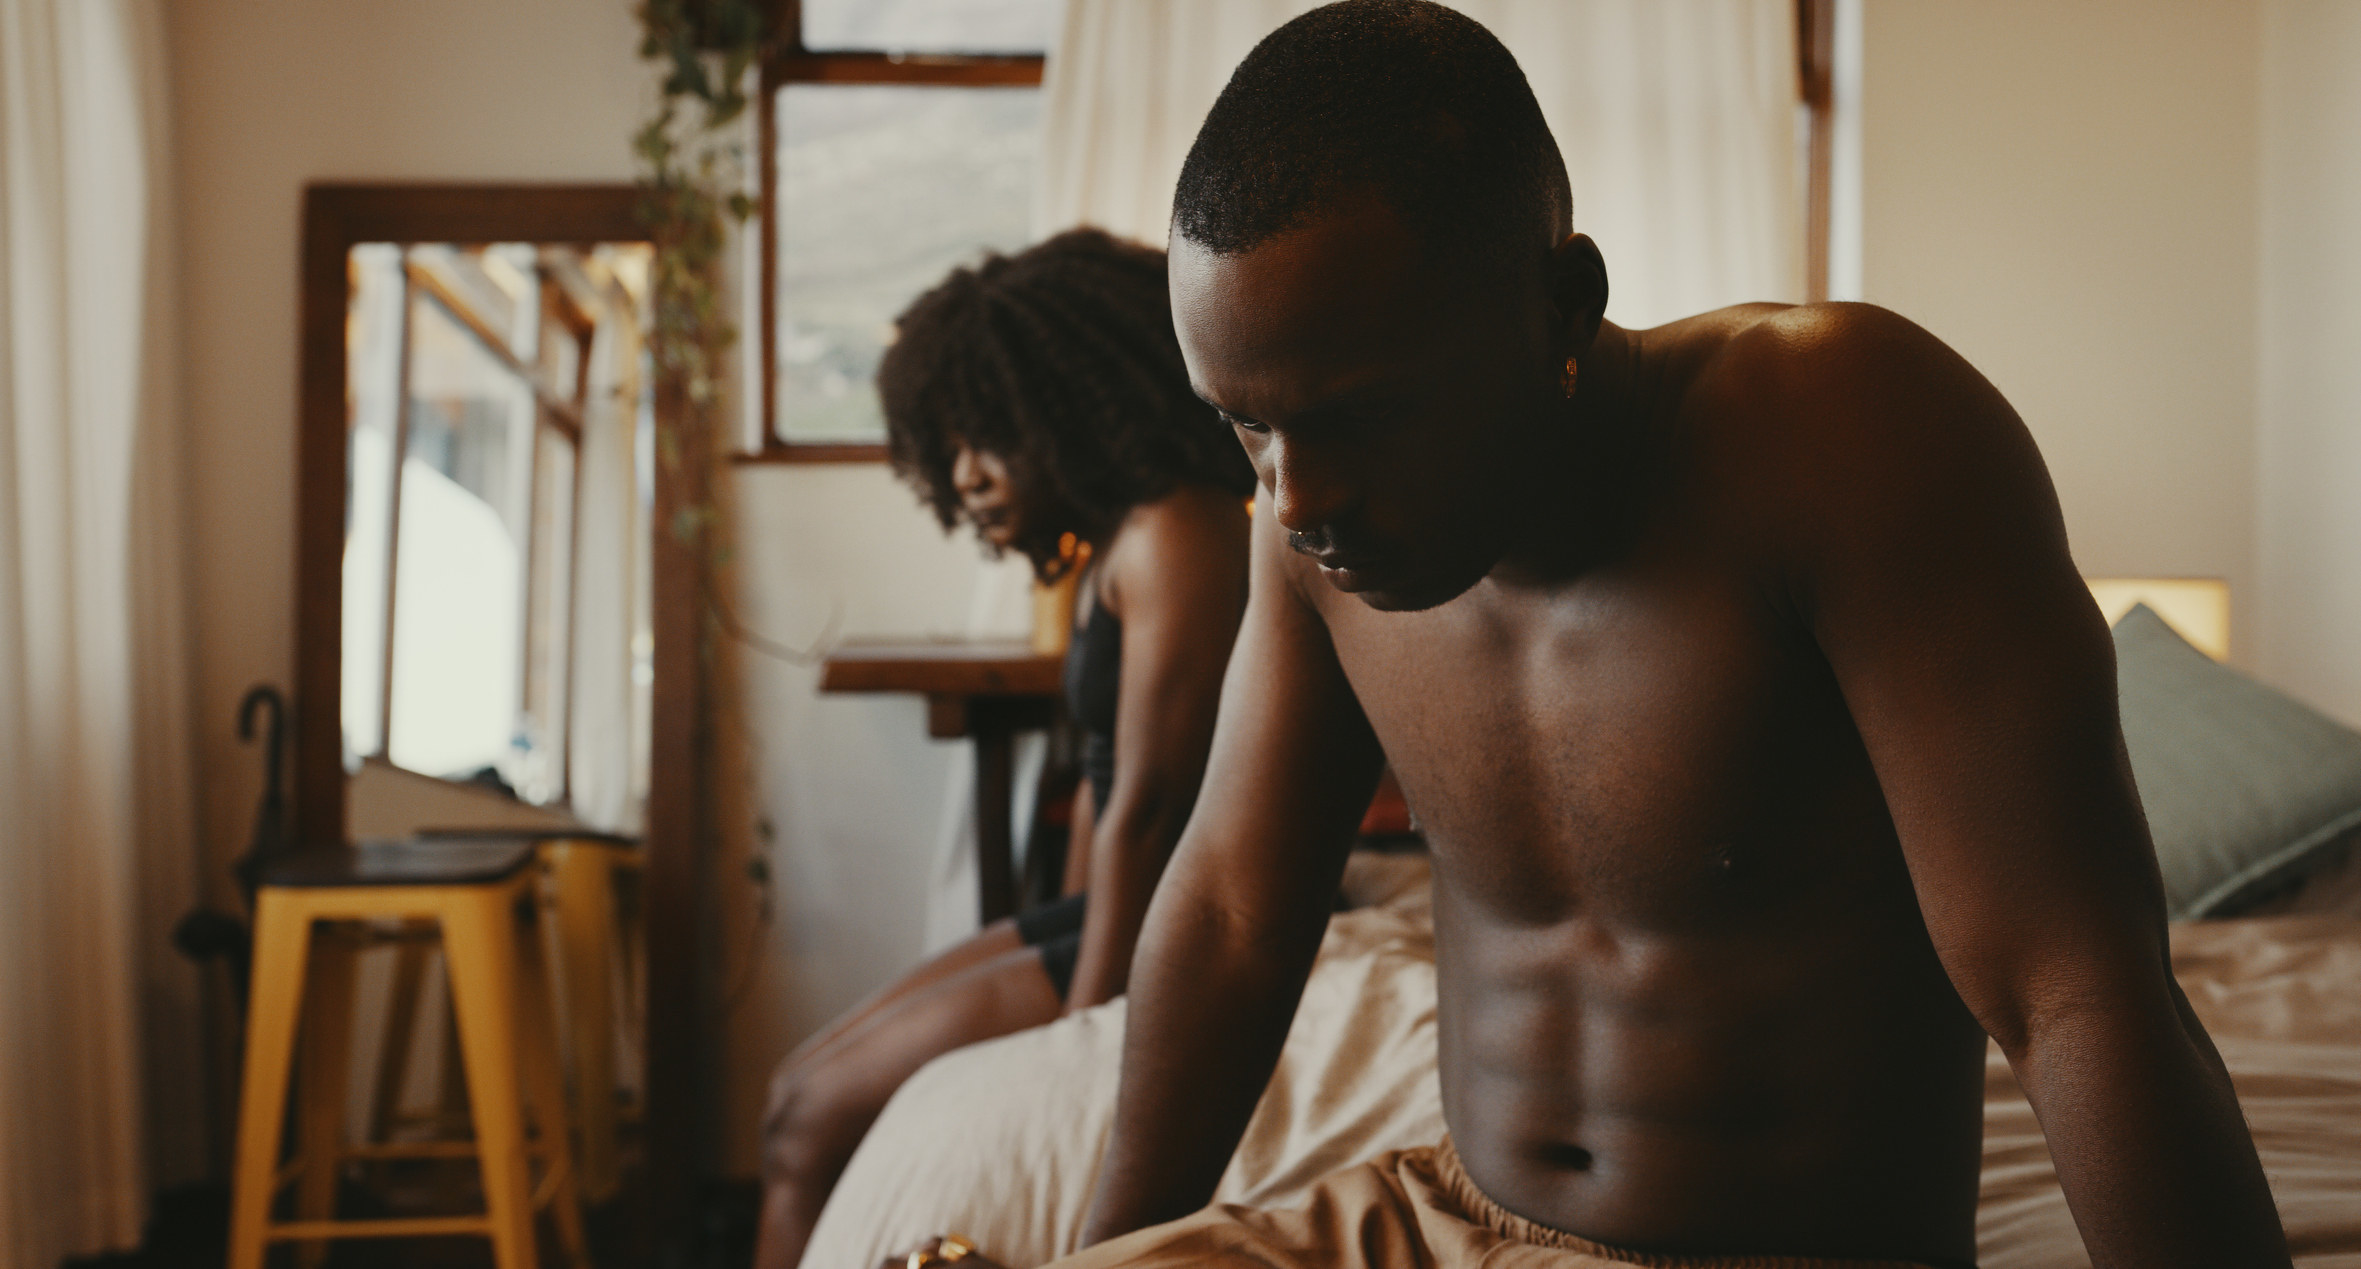 Shirtless man on bed sits far away from his partner, looking dejected